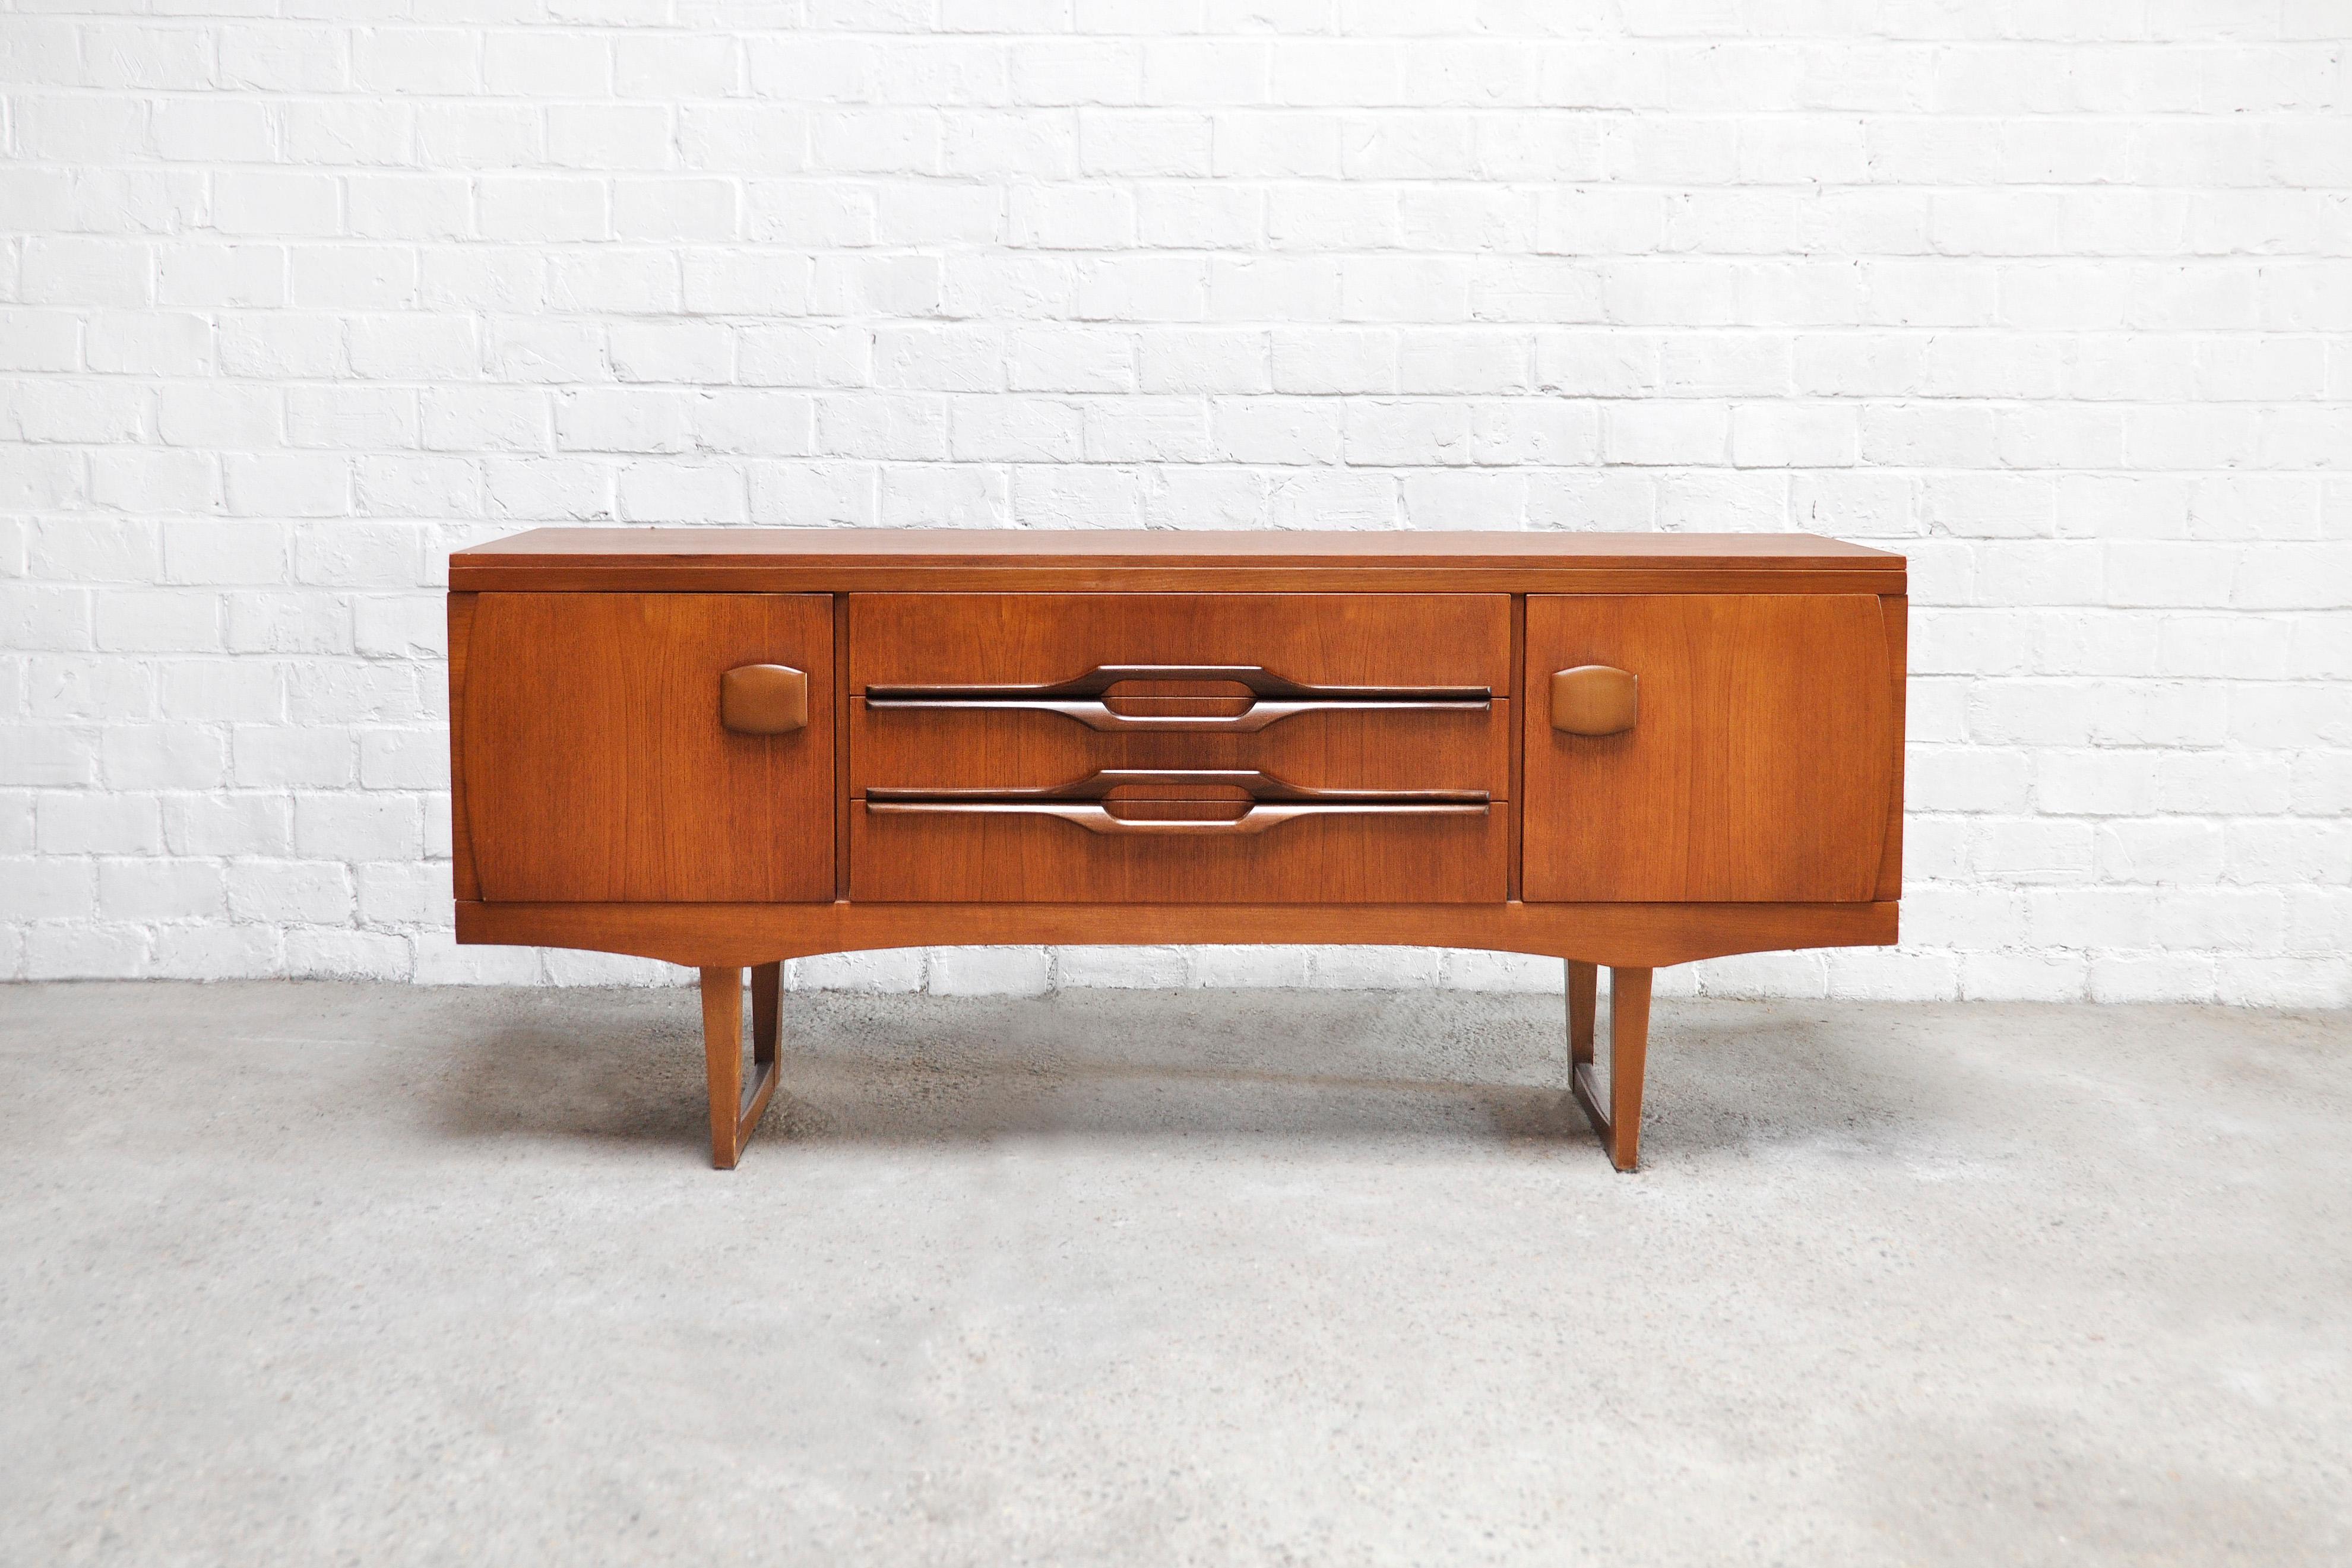 Vintage teak sideboard made by British manufacturer ‘Stonehill Furniture’ as part of their ‘Concord’ Range. The sideboard is finished in a rich-toned teak veneer with solid beechwood legs and lozenge-shaped wooden handles. The middle drawers can be